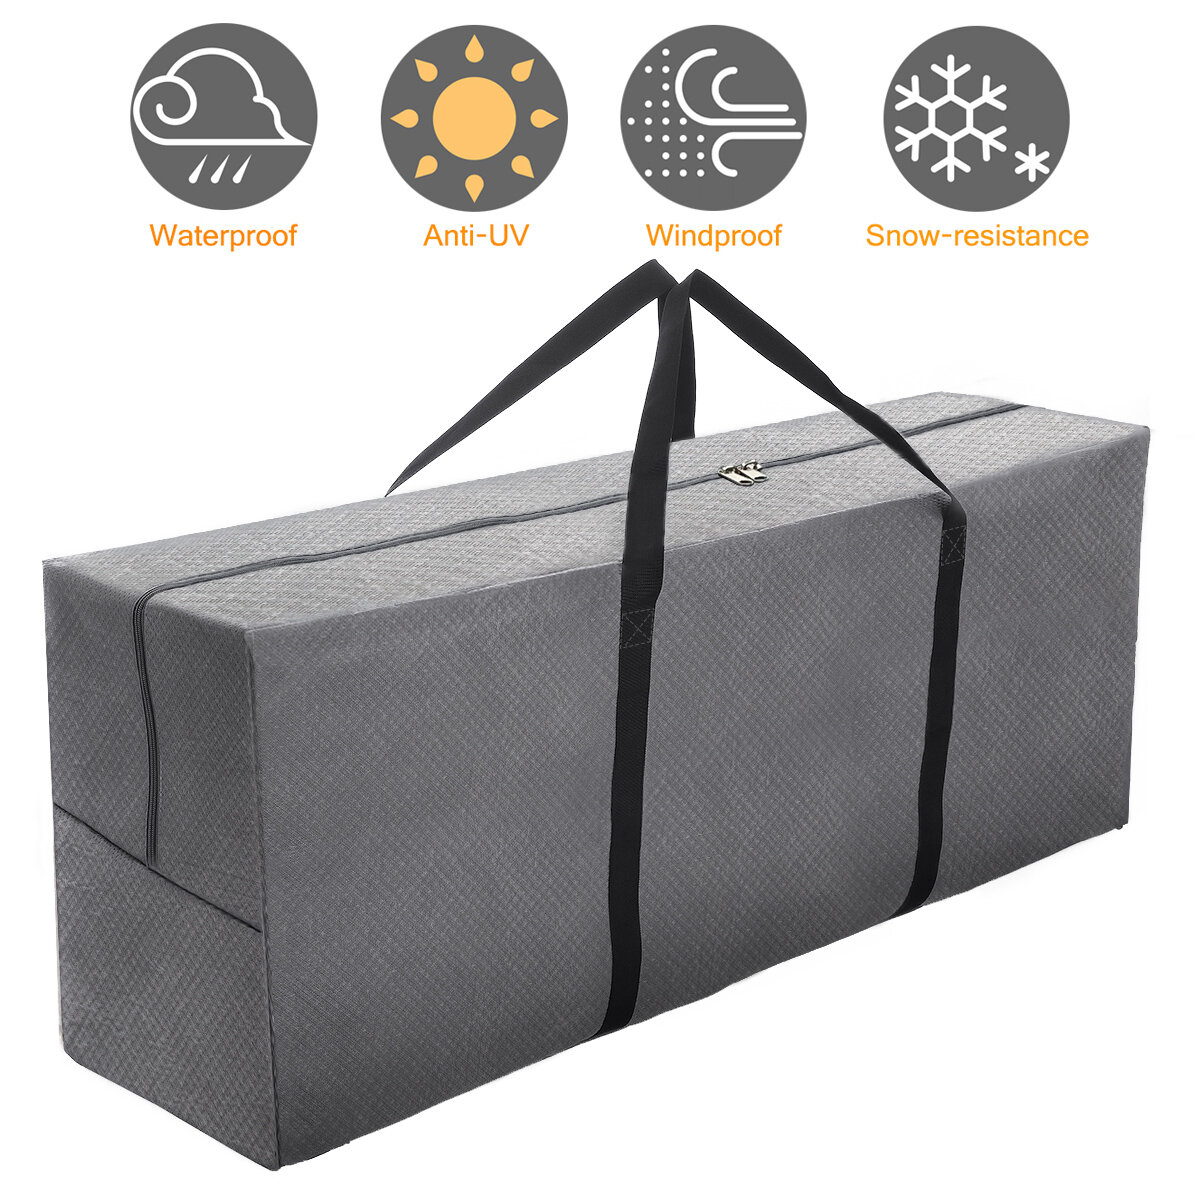 Tvird Extra Large Storage Bag for Cushion Garden Furniture Foldable Waterproof Heavy Duty OutdoorSto